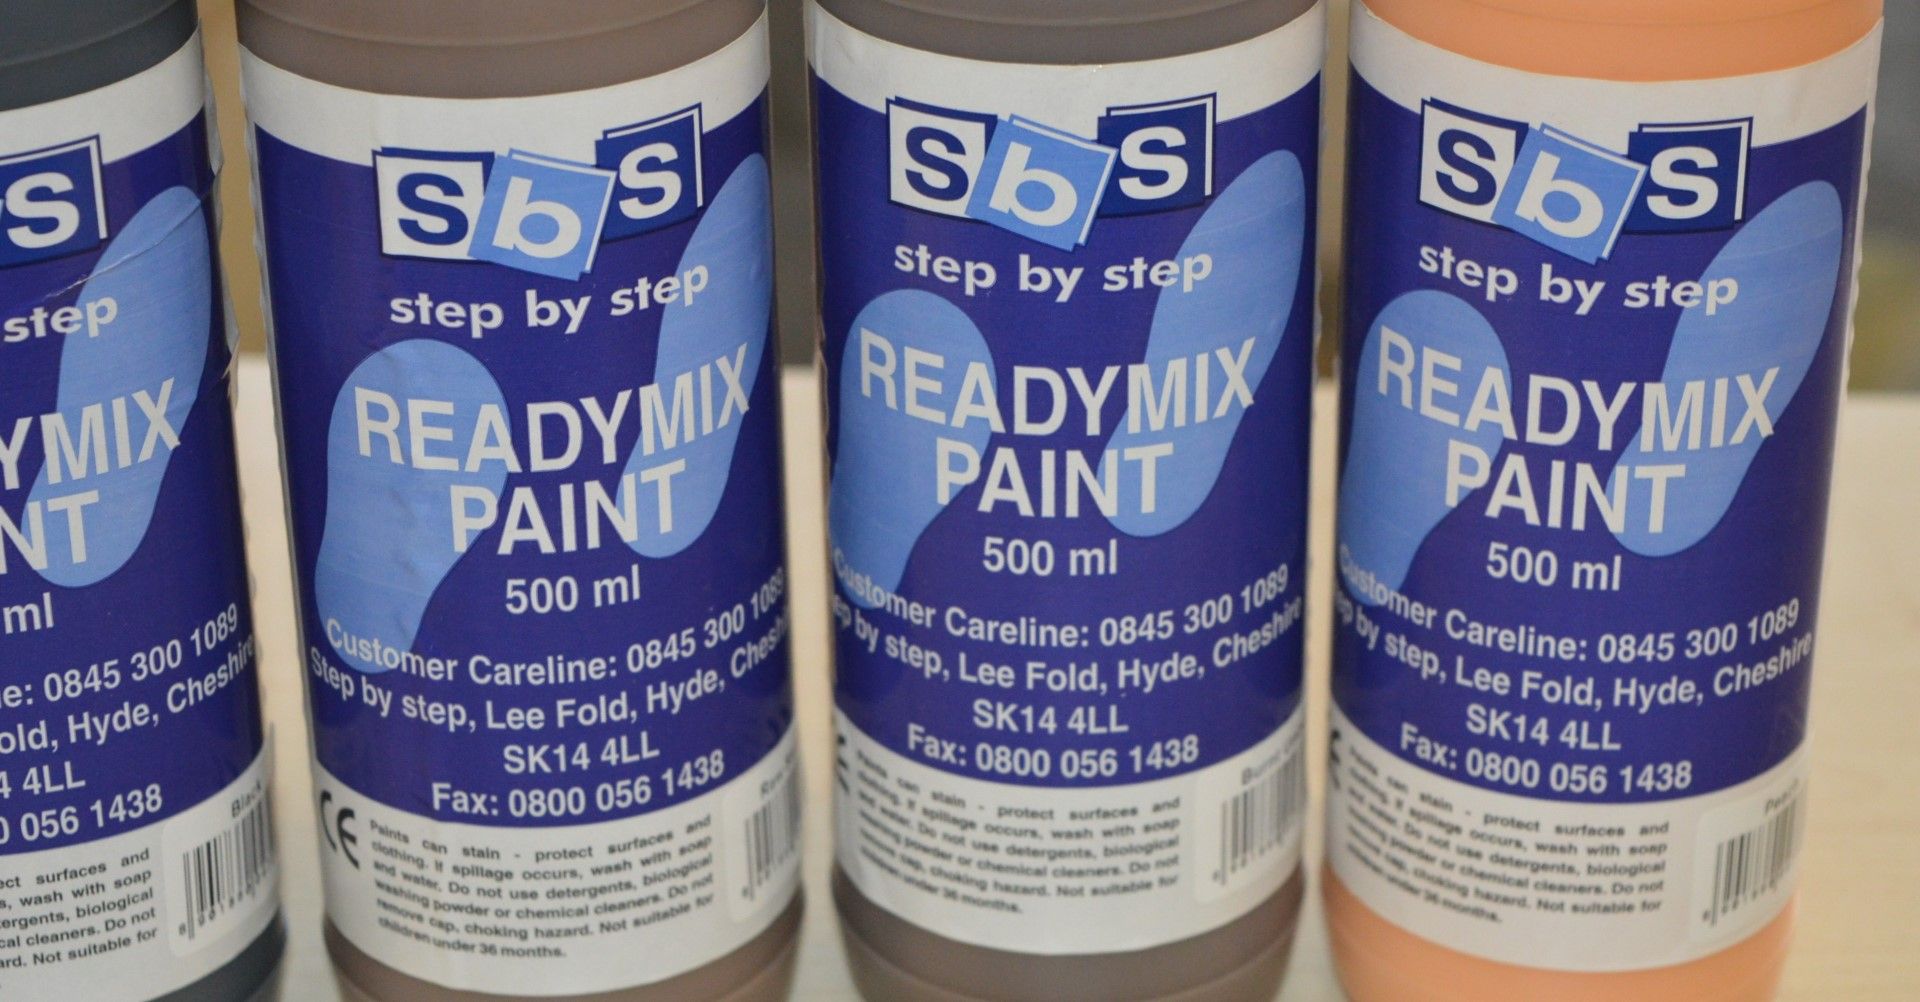 48 x Sets of SBS Step by Step Readymix Paint - 288 x 500ml Bottles - 48 x Sets of 6 Bottles in 8 x - Image 8 of 8